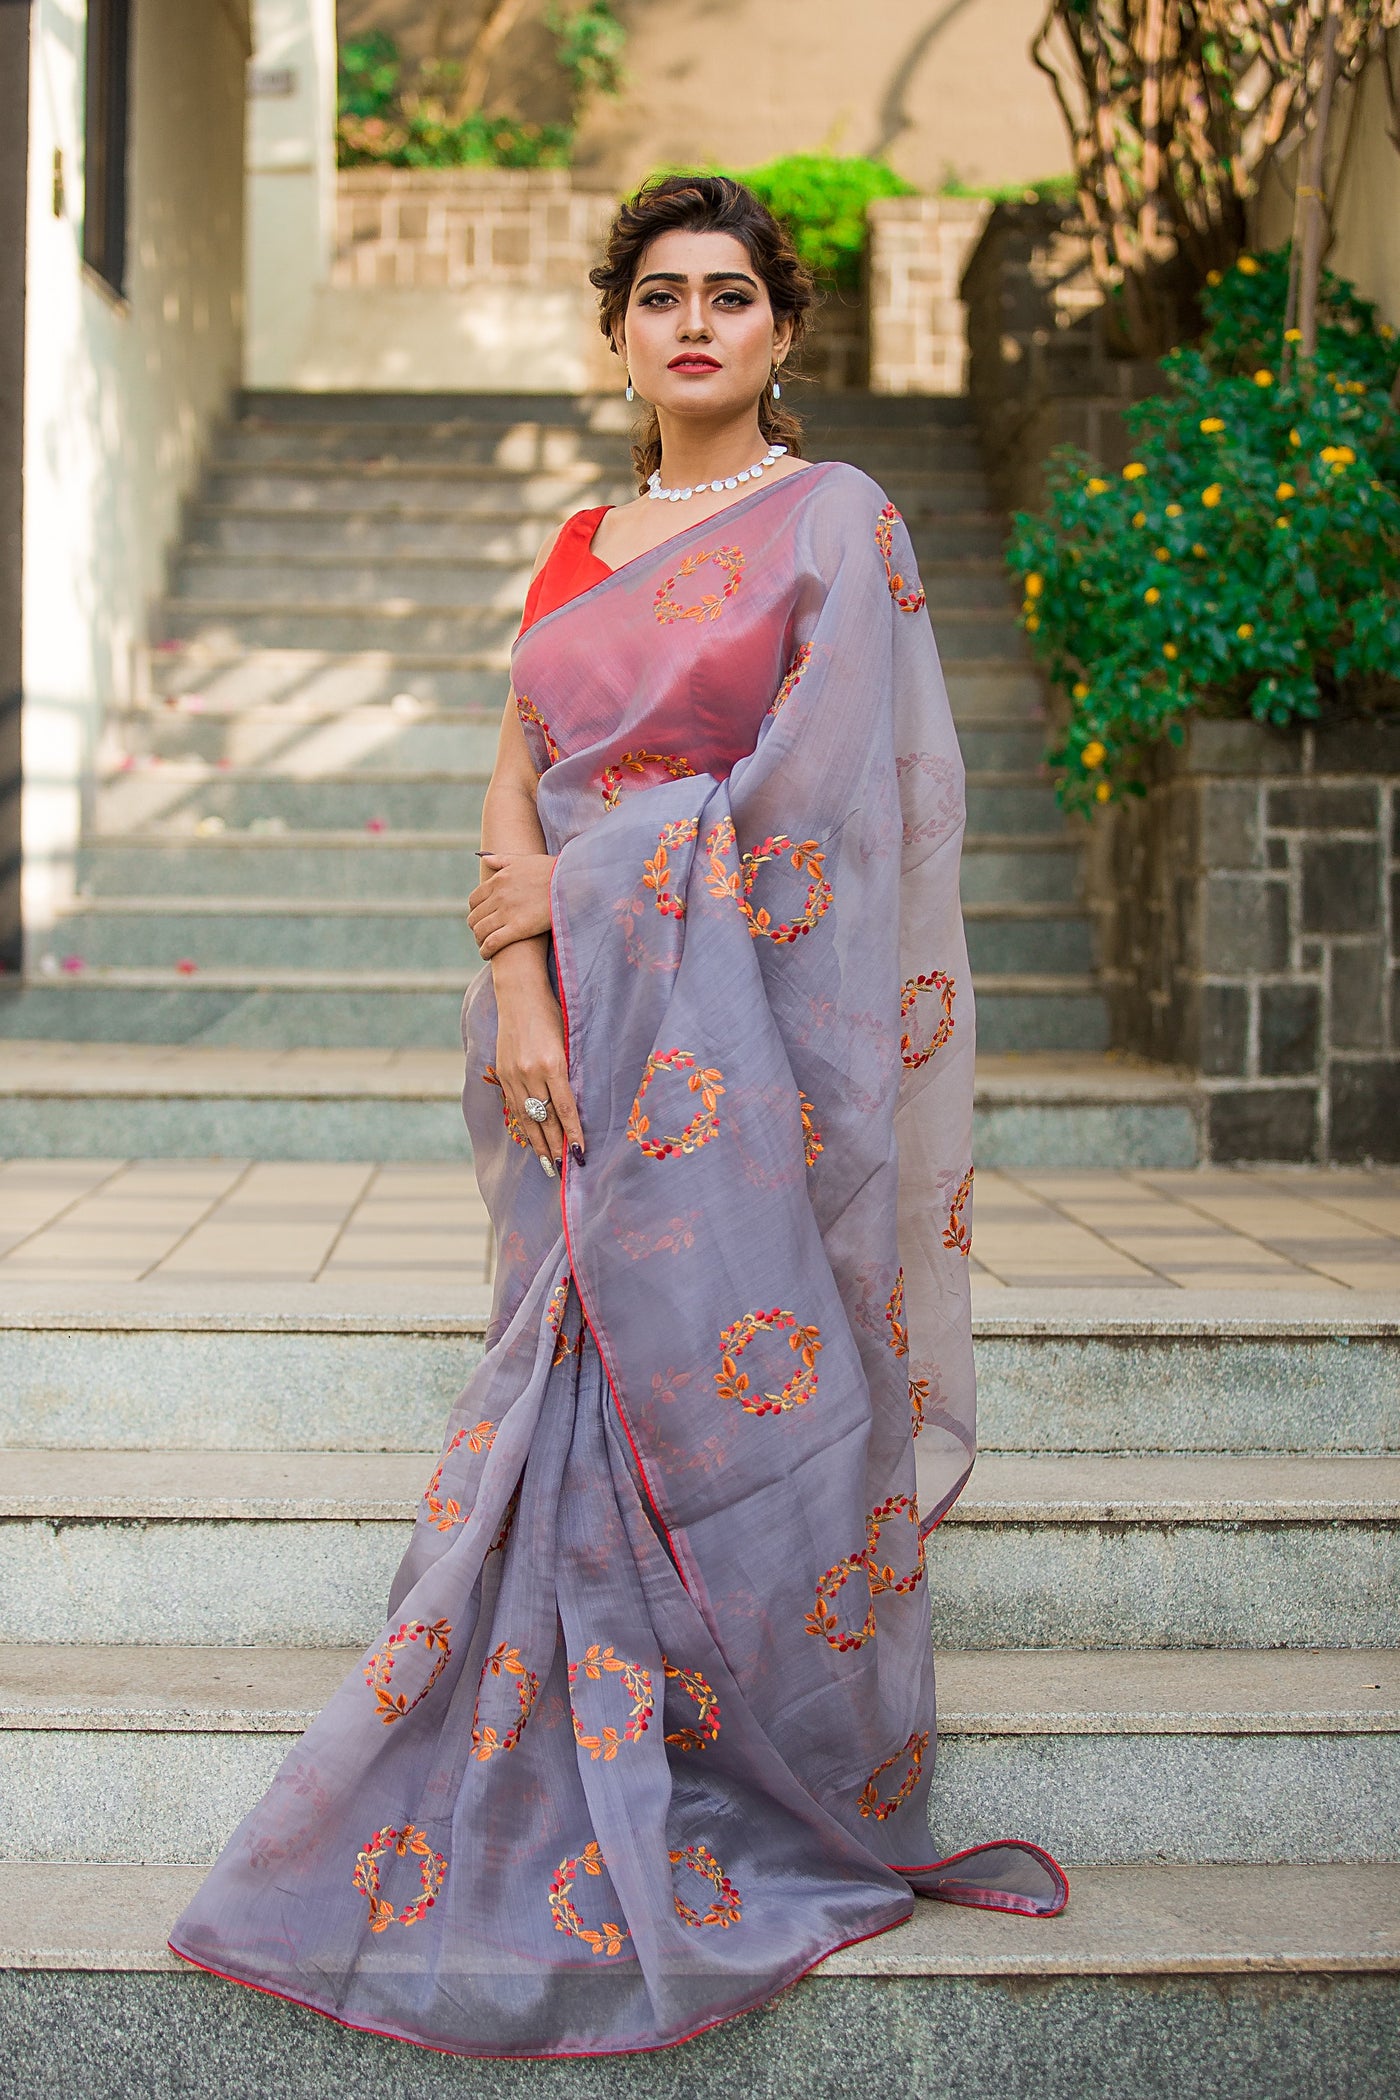 Gray Floral Organza Saree Indian Clothing in Denver, CO, Aurora, CO, Boulder, CO, Fort Collins, CO, Colorado Springs, CO, Parker, CO, Highlands Ranch, CO, Cherry Creek, CO, Centennial, CO, and Longmont, CO. NATIONWIDE SHIPPING USA- India Fashion X